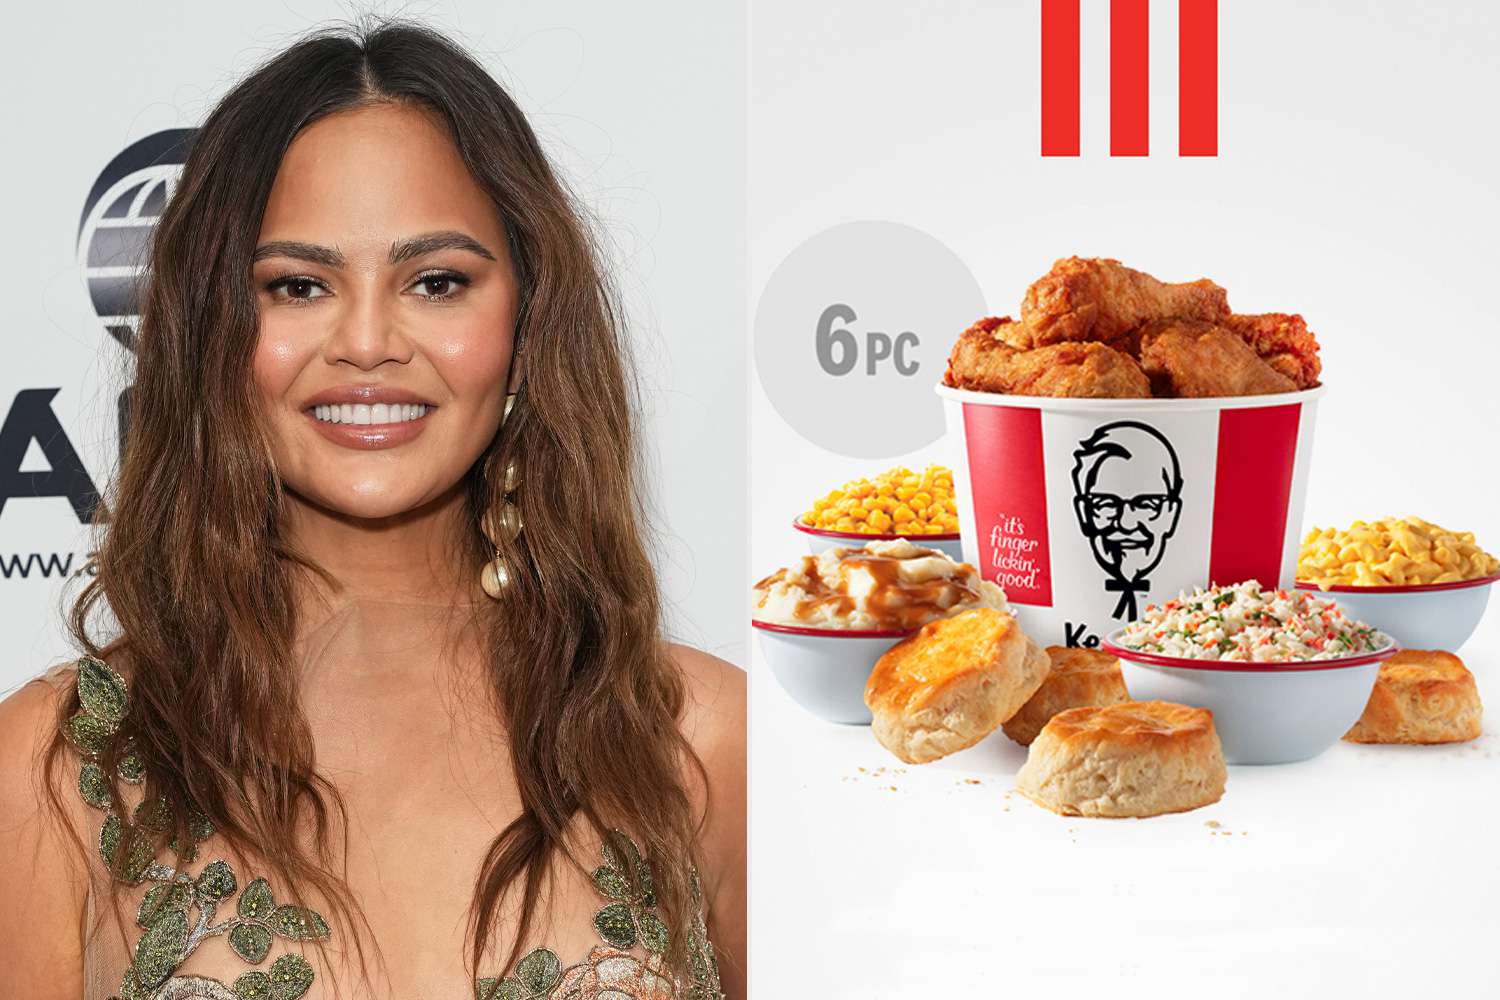 All the Fast Food Deals to Treat Mom with on Sunday, Including Chrissy Teigen's KFC Mother's Day Menu